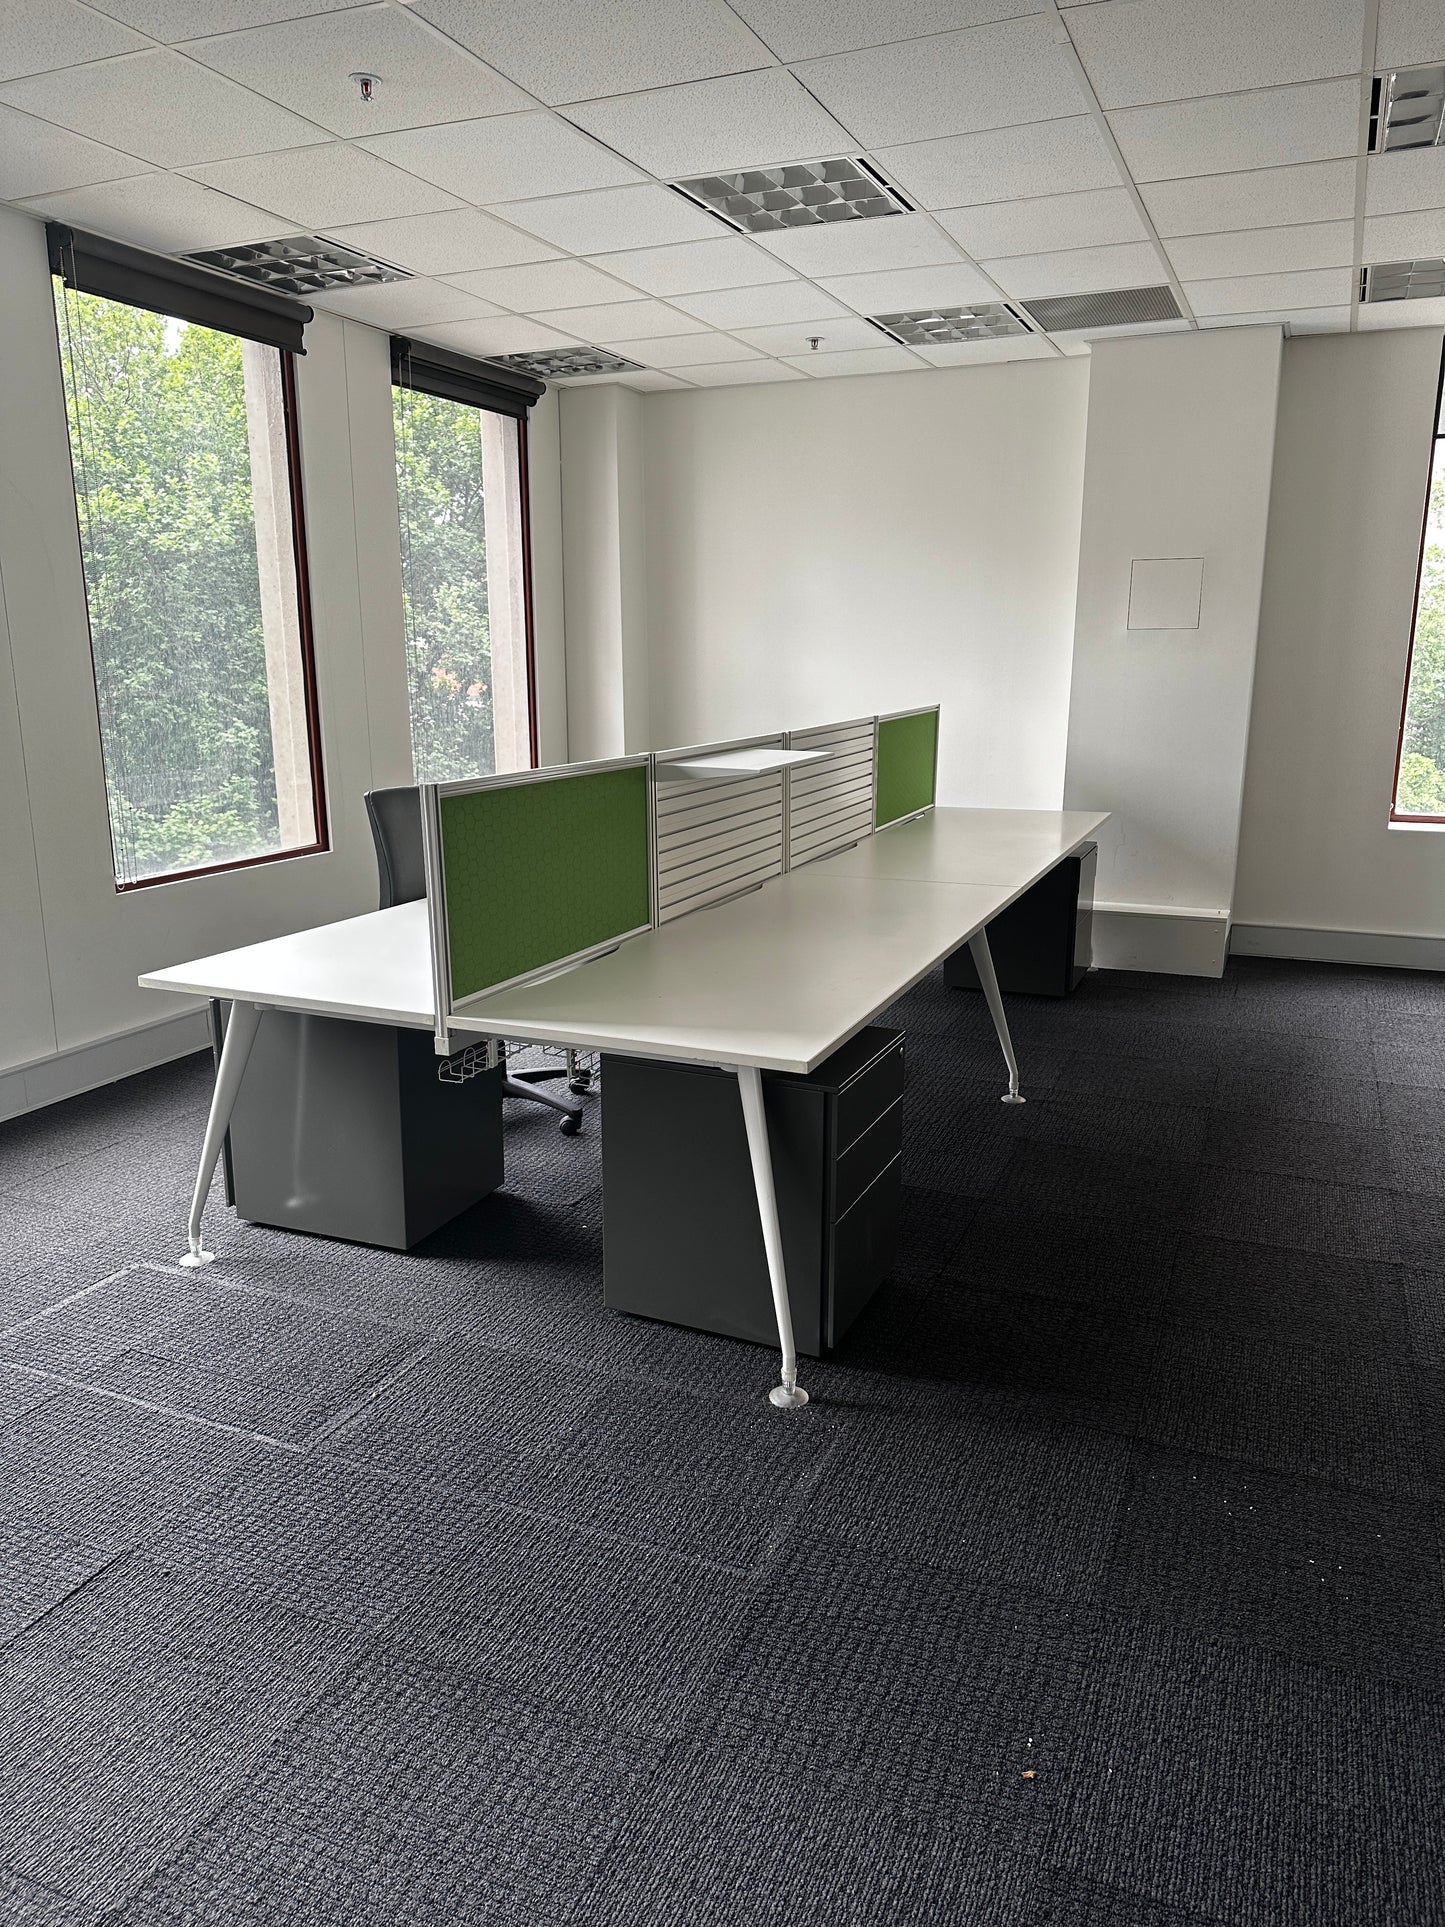 Methis Australia 4 Person Workstation with Green Partitions